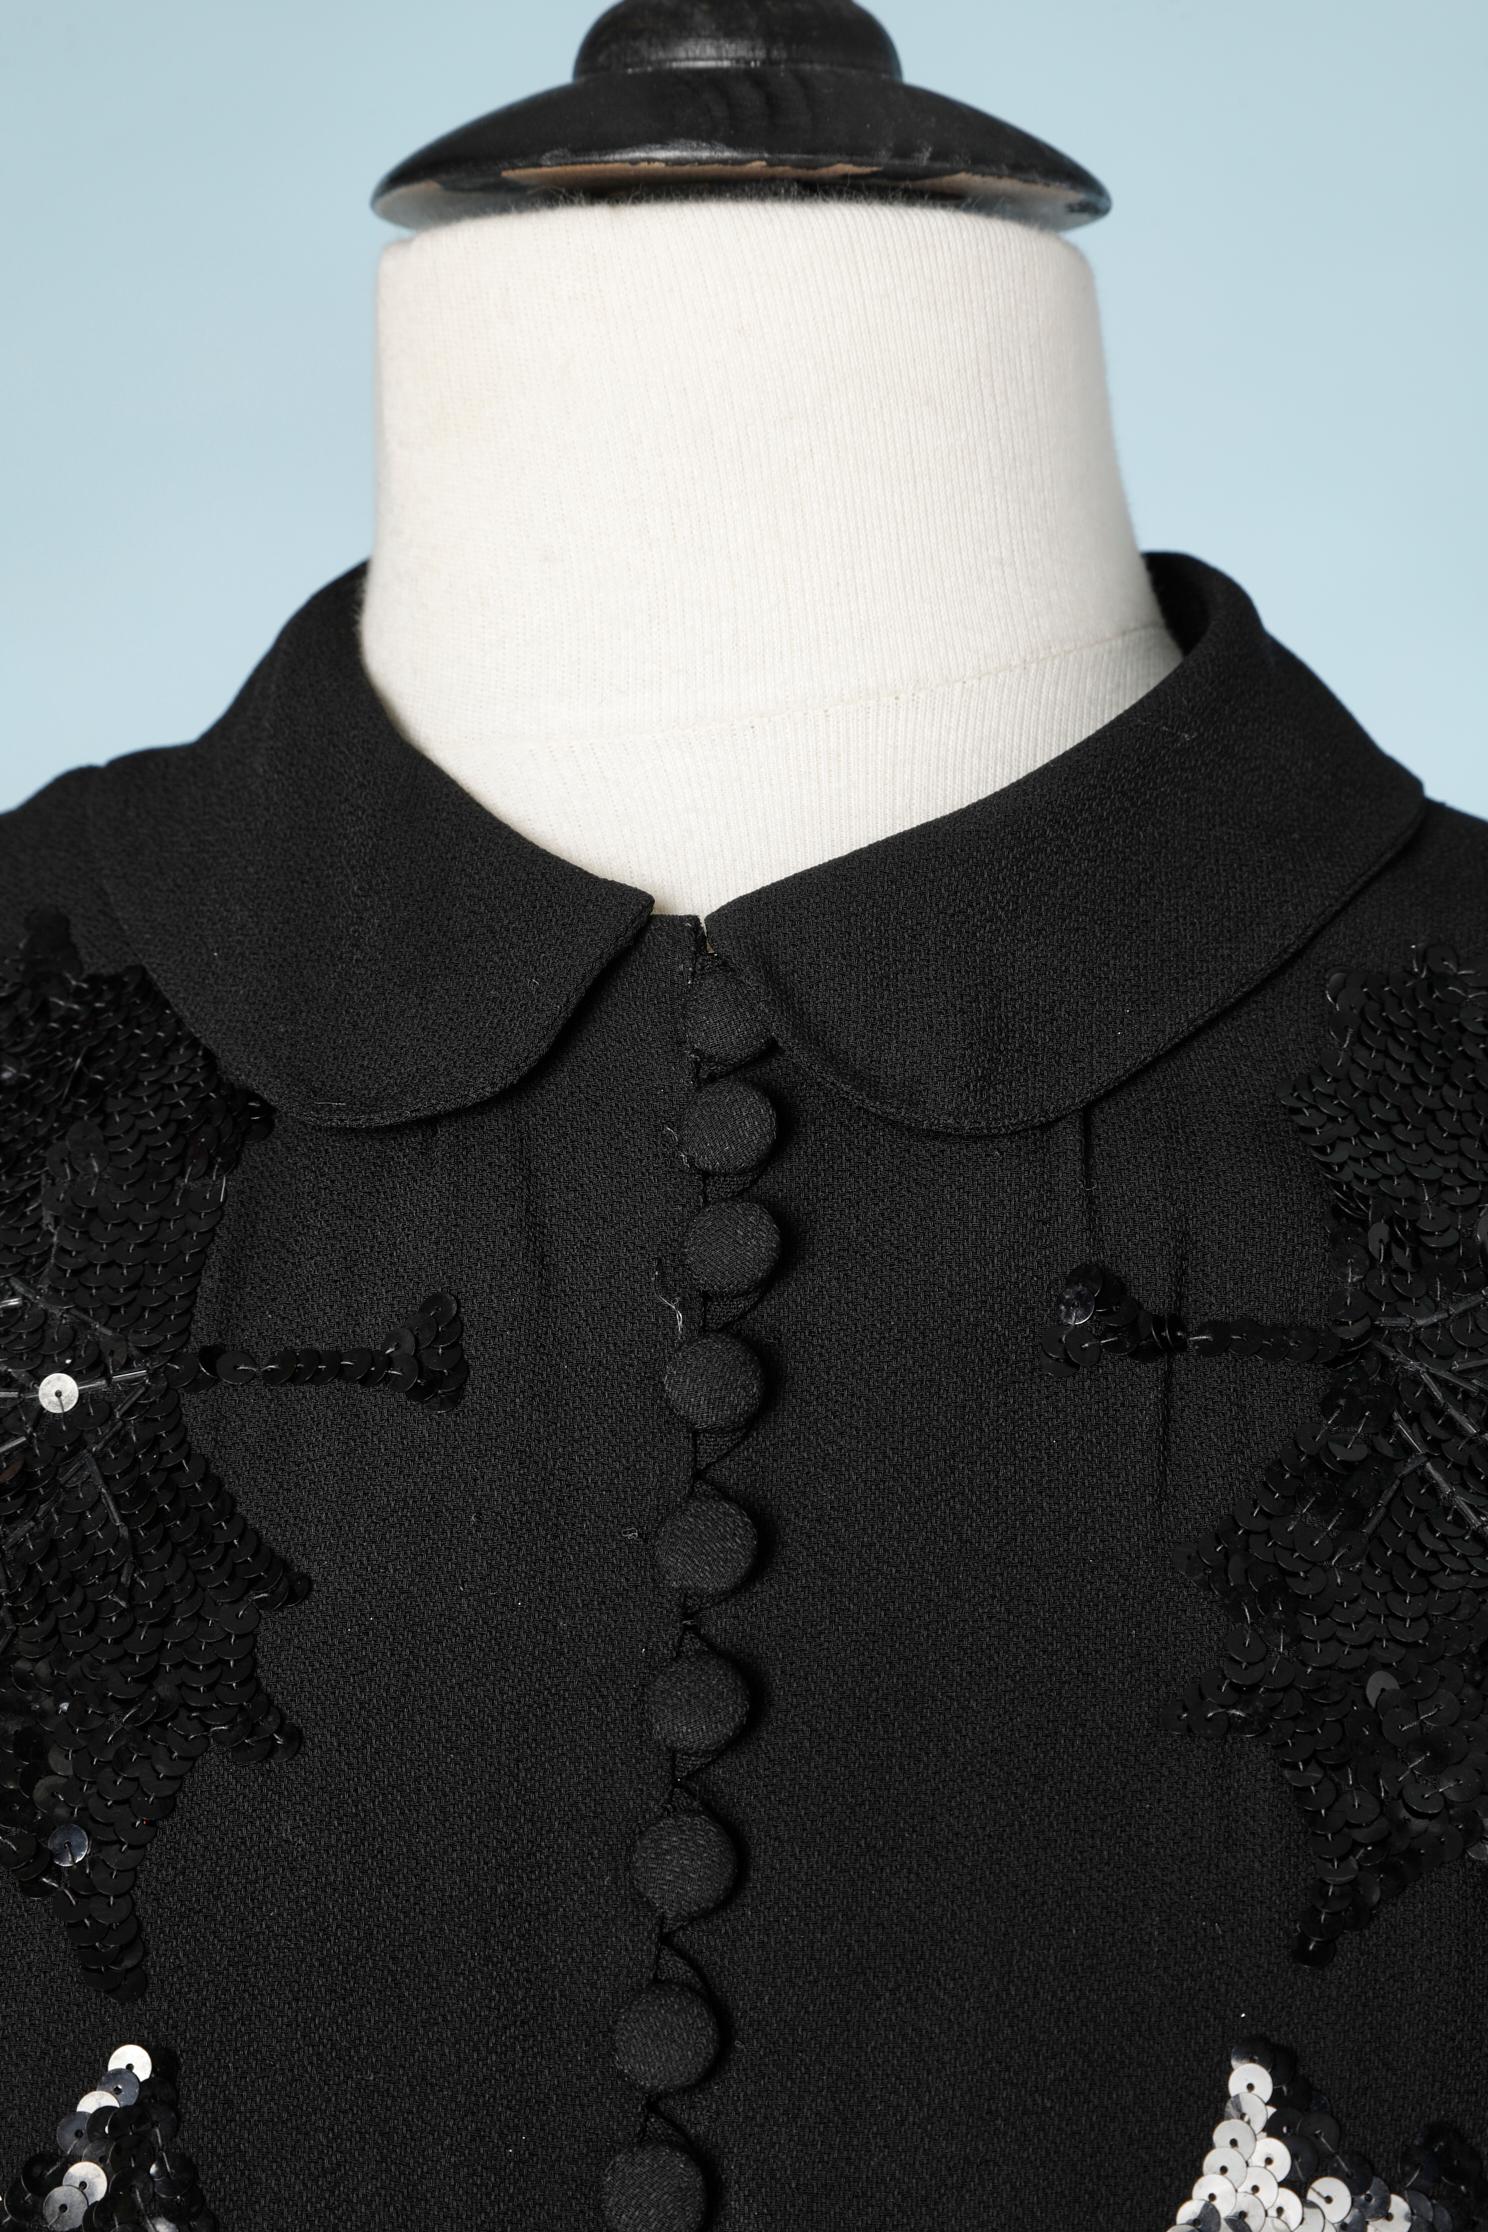 Black crêpe jacket with tree leaves embroideries. Buttons are covered with crêpe. Shoulder pads. Crêpe lining and taffetas lining inside sleeves; Buttons on the cuffs as well. 
SIZE M 